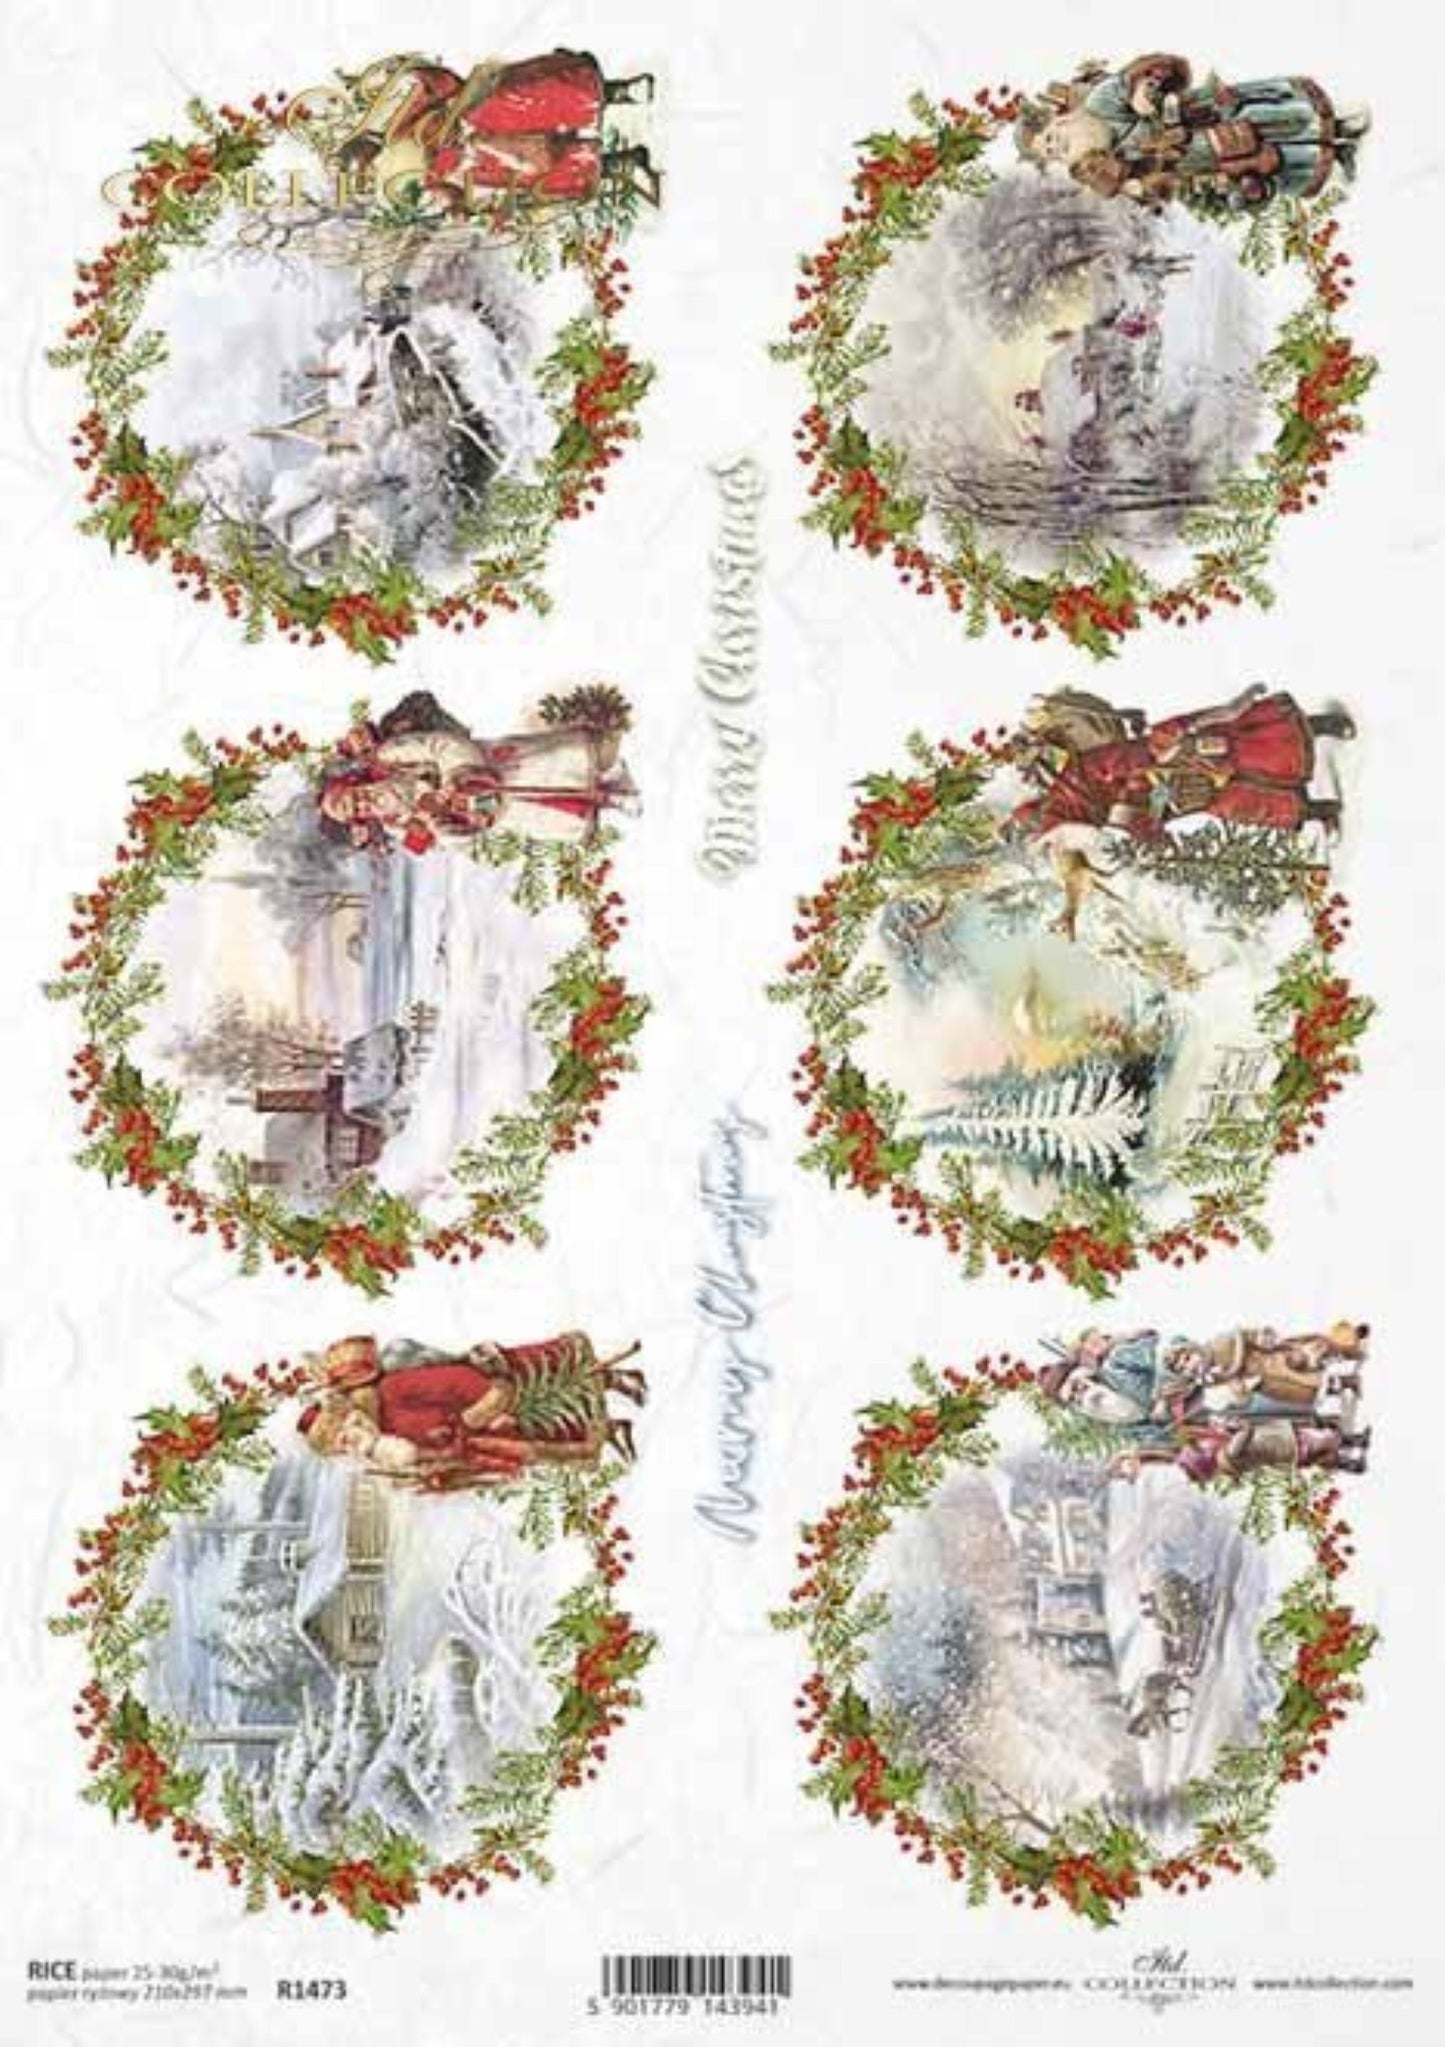 ITD Collection Rice Paper for Decoupage R1473, Size A4 - 210x297 mm, 8.27x11.7 inch, Christmas Rounds, decorations, wreaths, holly, Santa